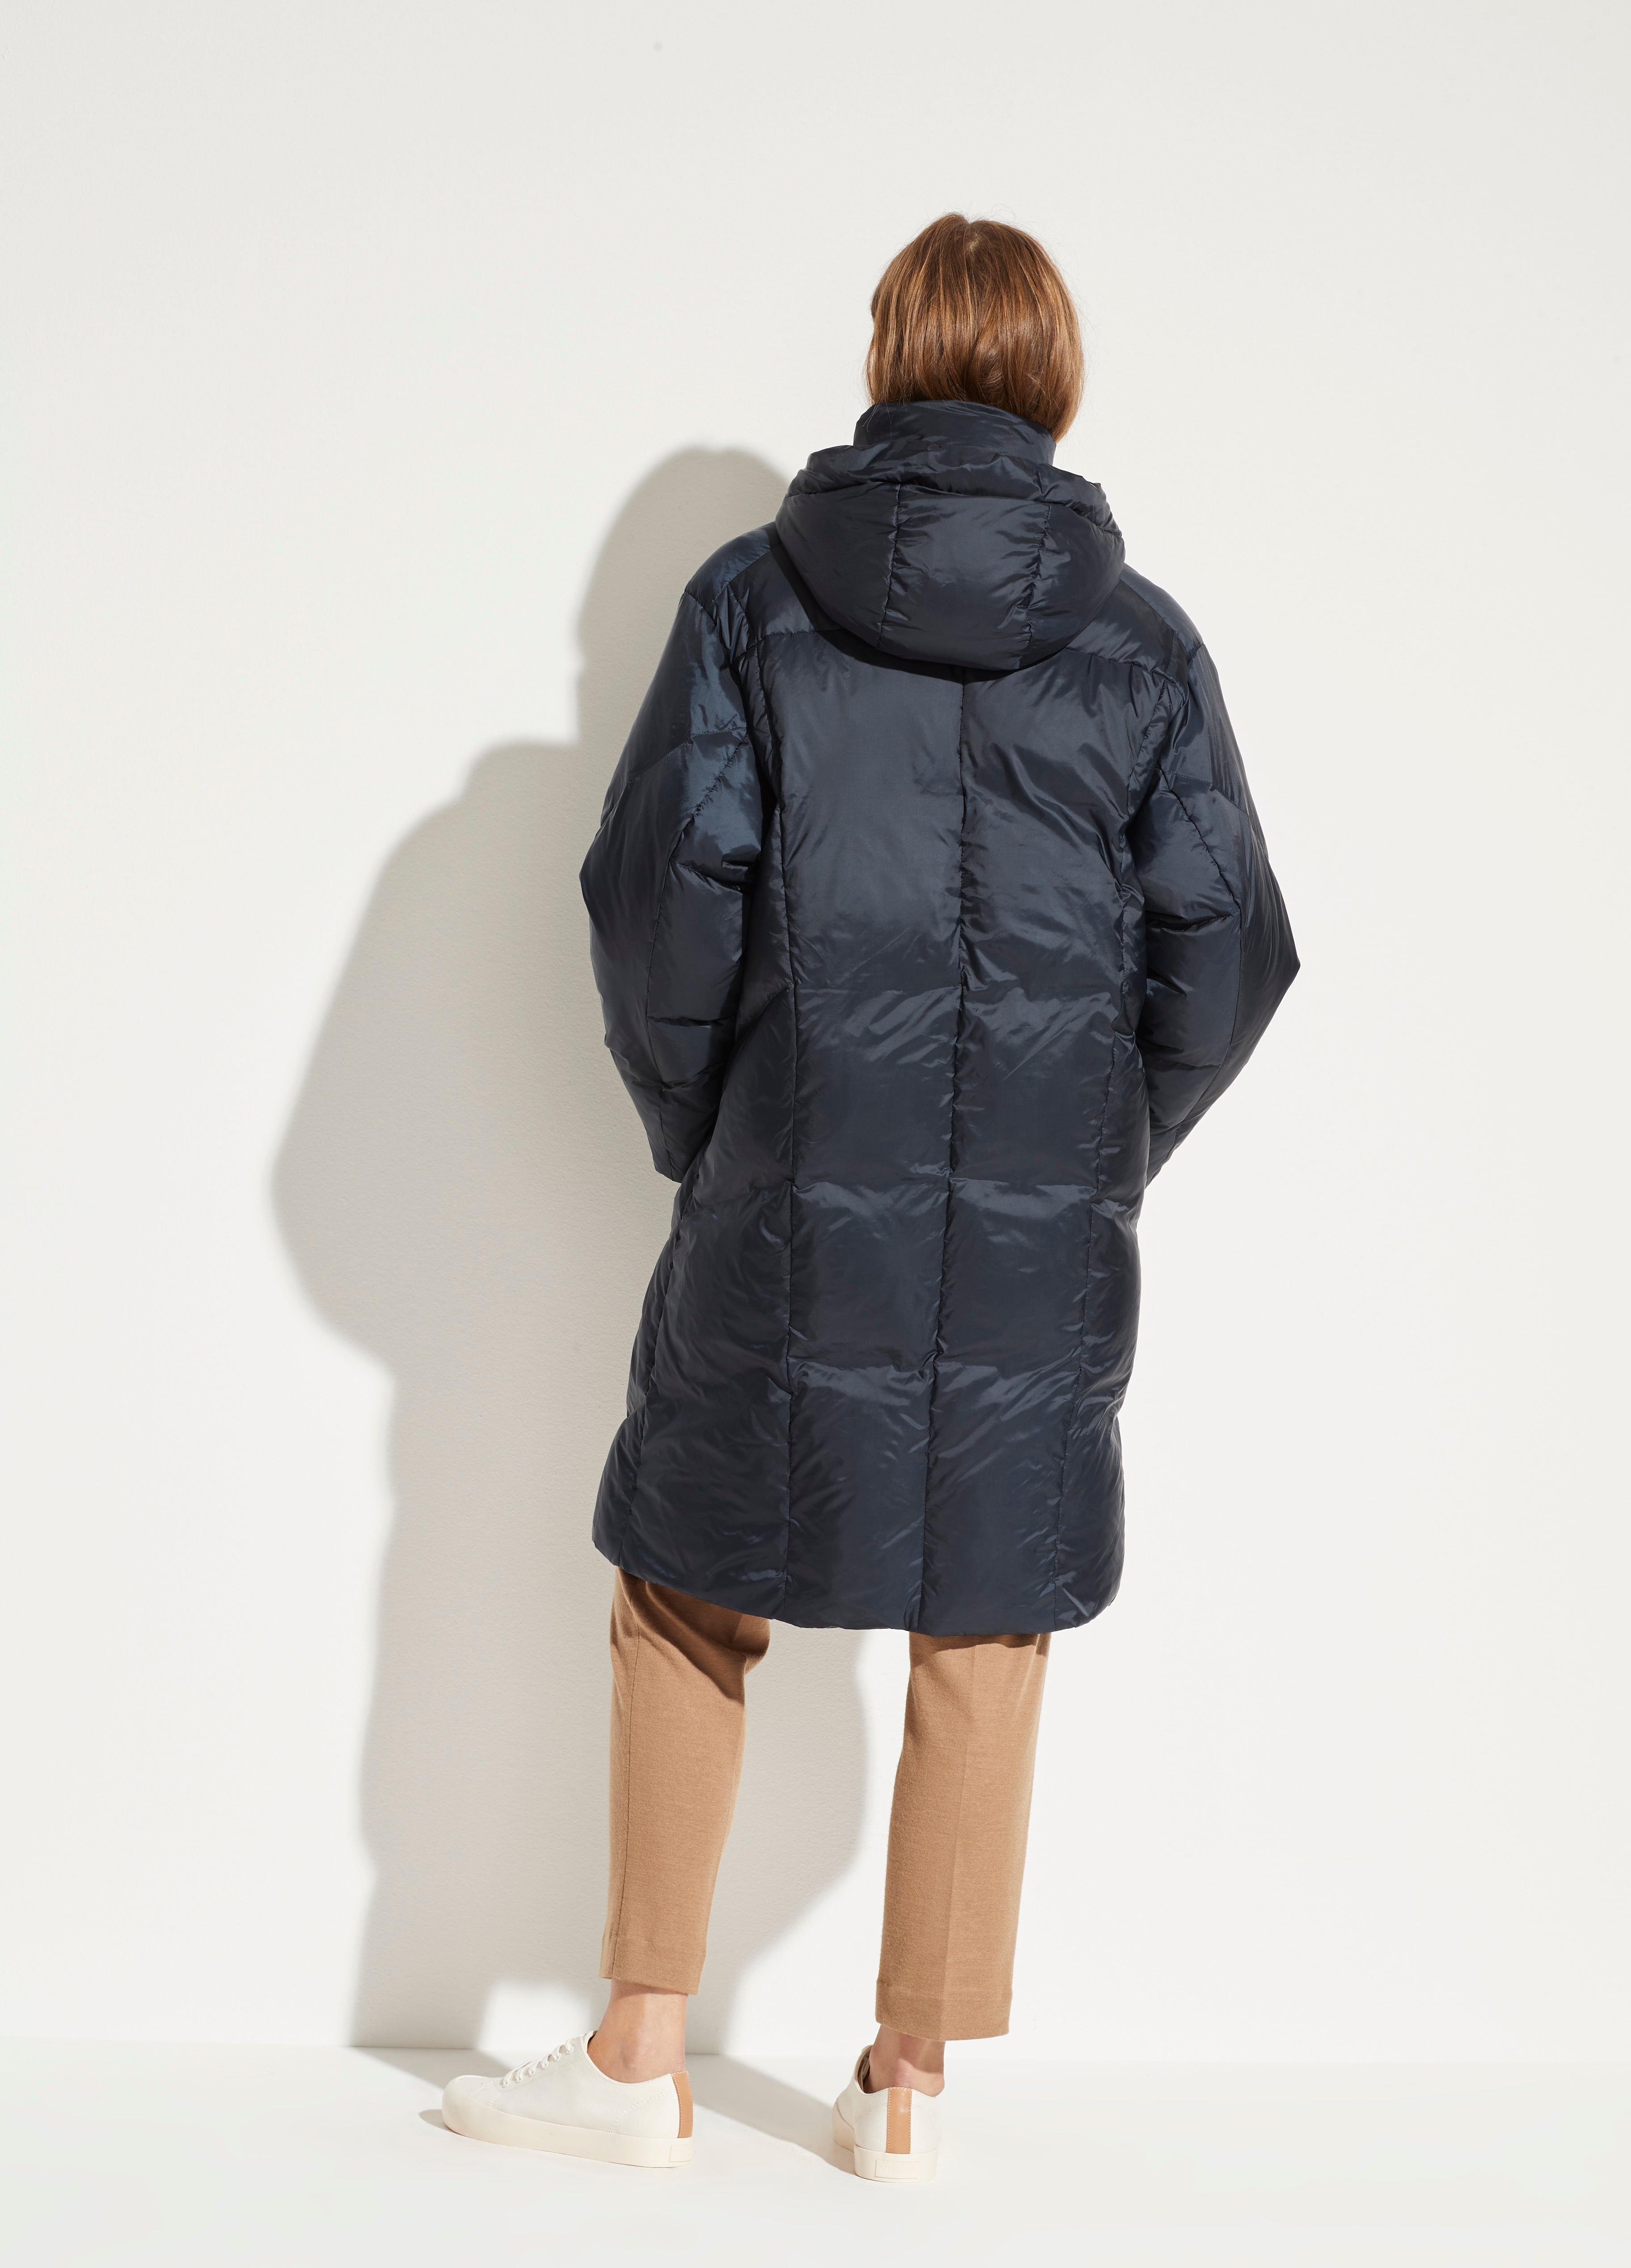 Vince | Quilted Puffer Coat in Coastal Blue | Vince Unfold